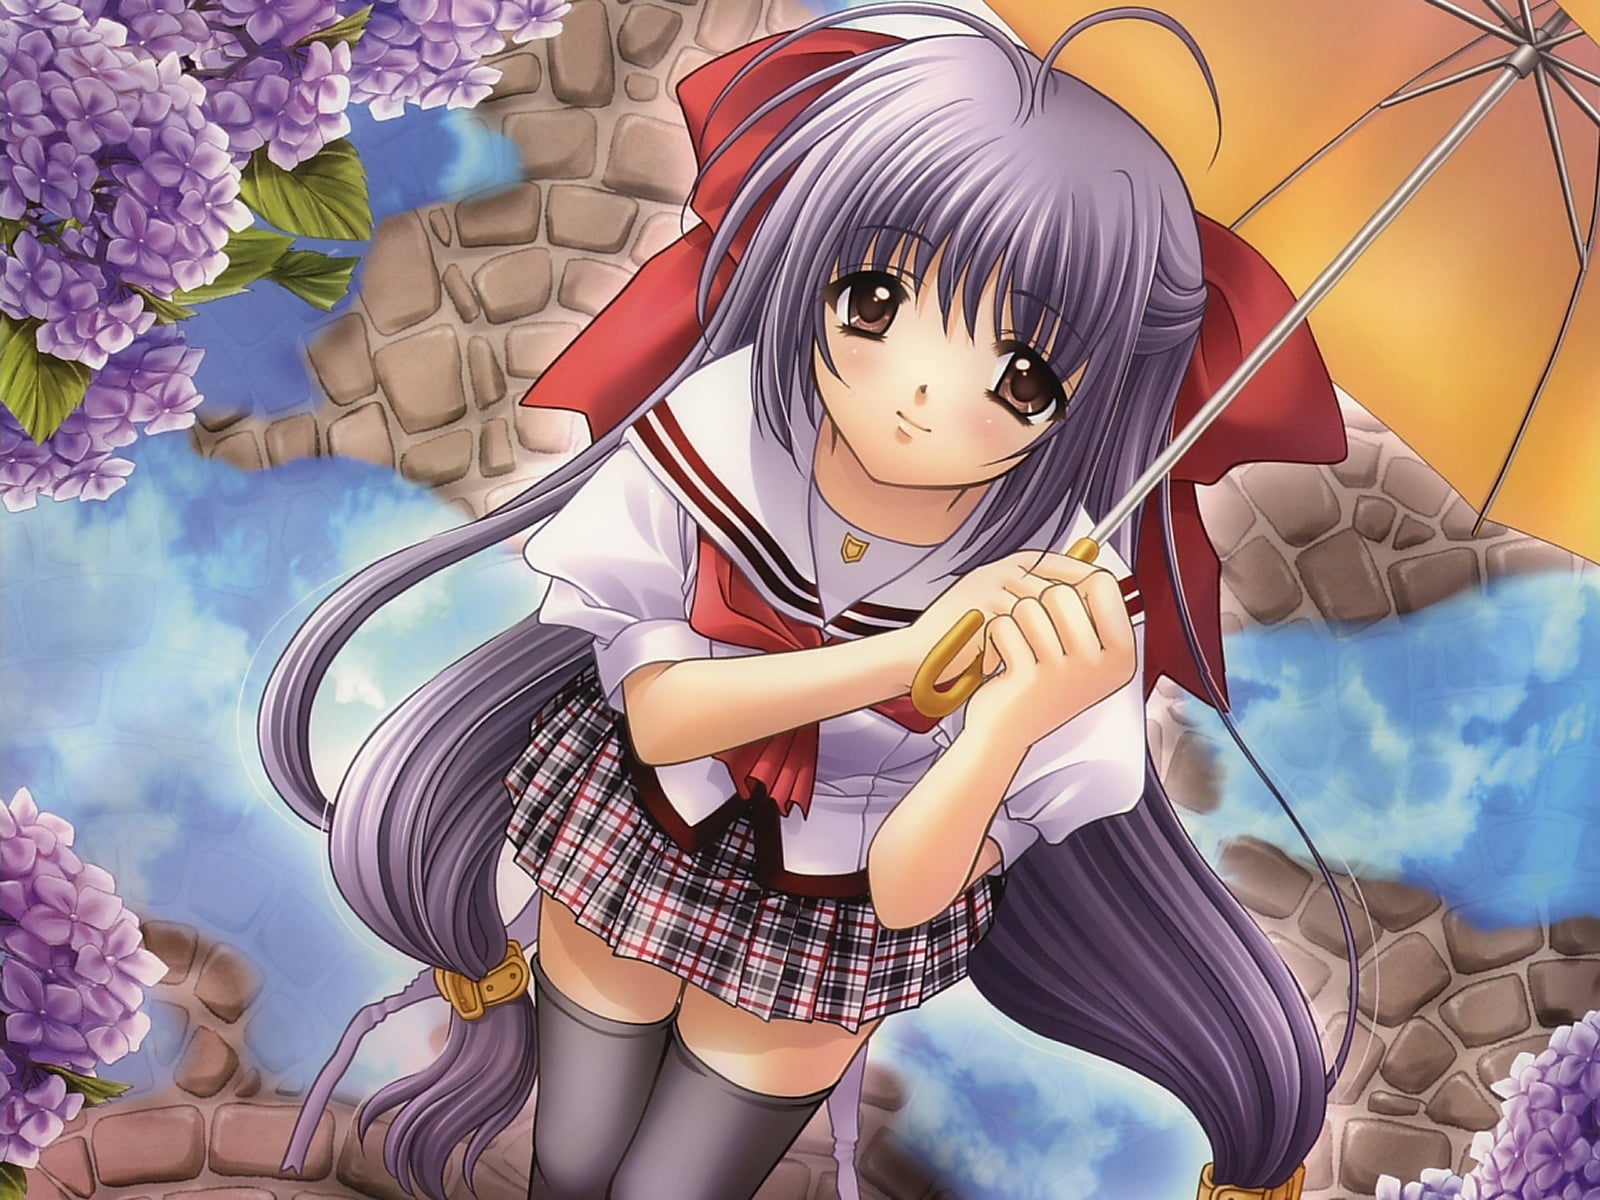 Anime School Girl With Umbrella Clannad Character Illustration